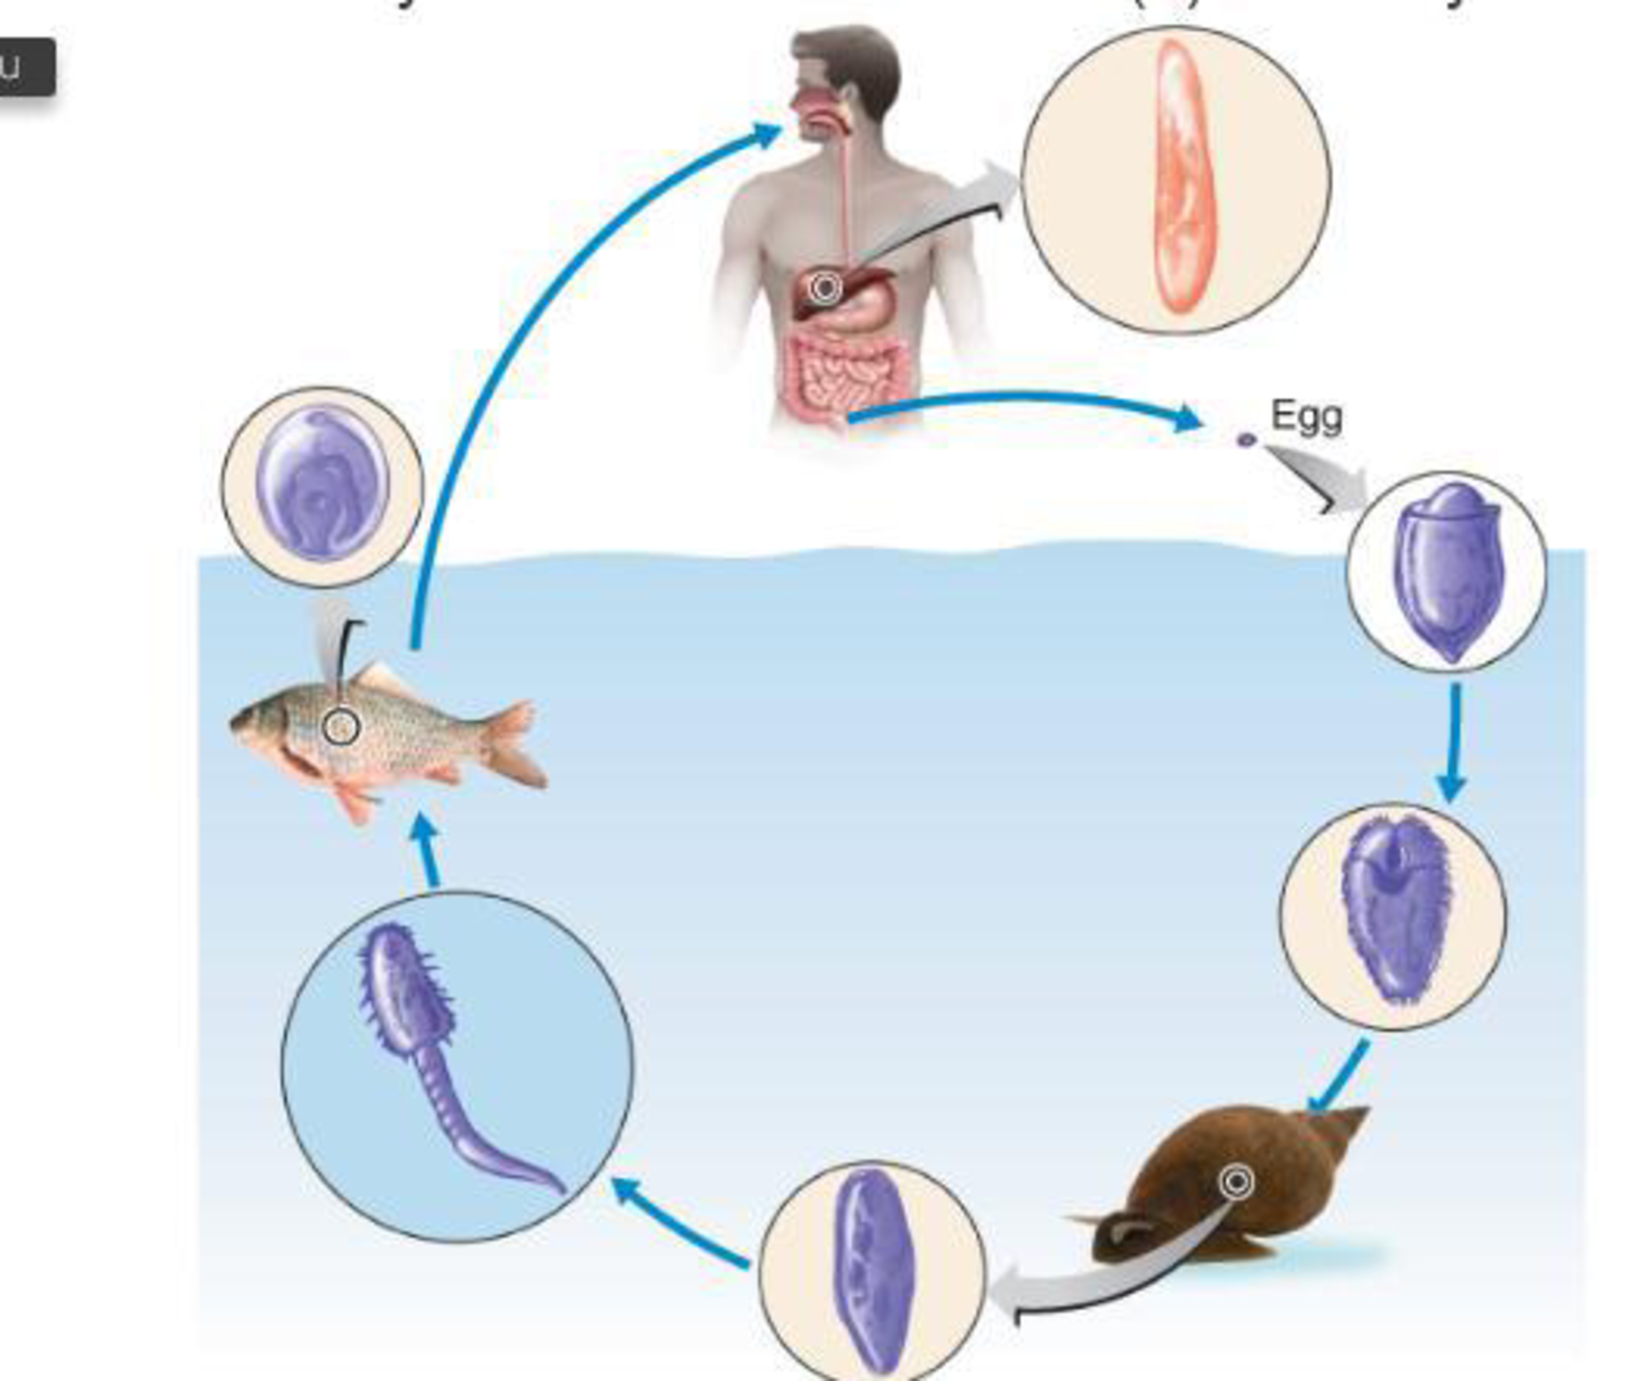 Chapter 12, Problem 10R, DRAW IT A generalized life cycle of the liver fluke Clonorchis sinensis is shown below. Label the 